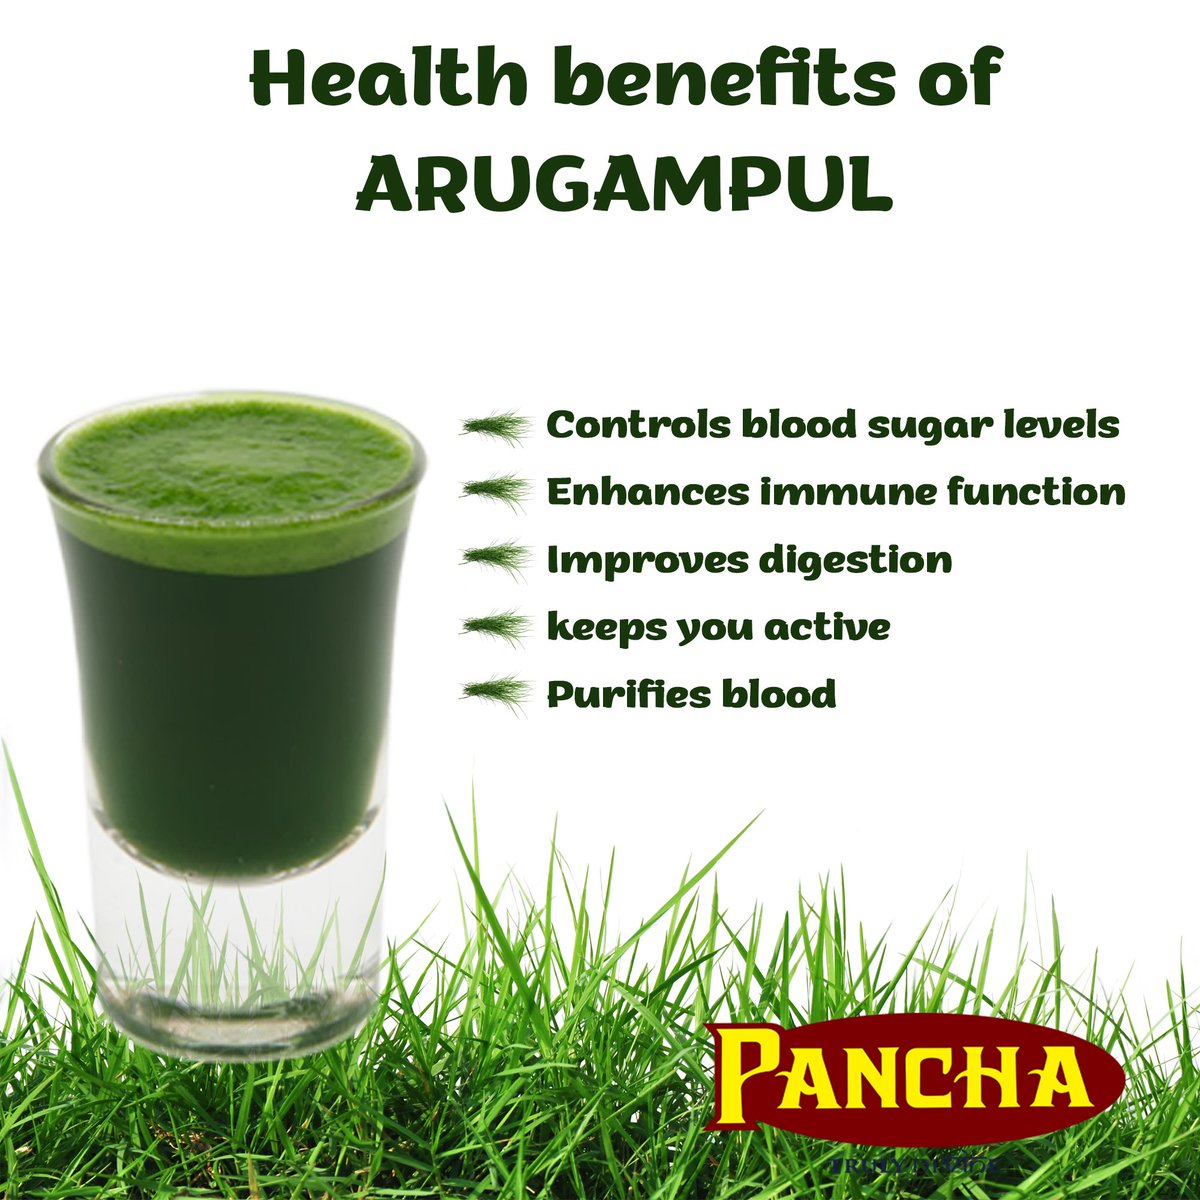 We are all offer Arugampul to loard Ganesha during special prayers for him but how many of us know that Arugampul has many amazing health benefits?

#Arugampul #ArugampulJuice #Pancha #PanchaMalaysia